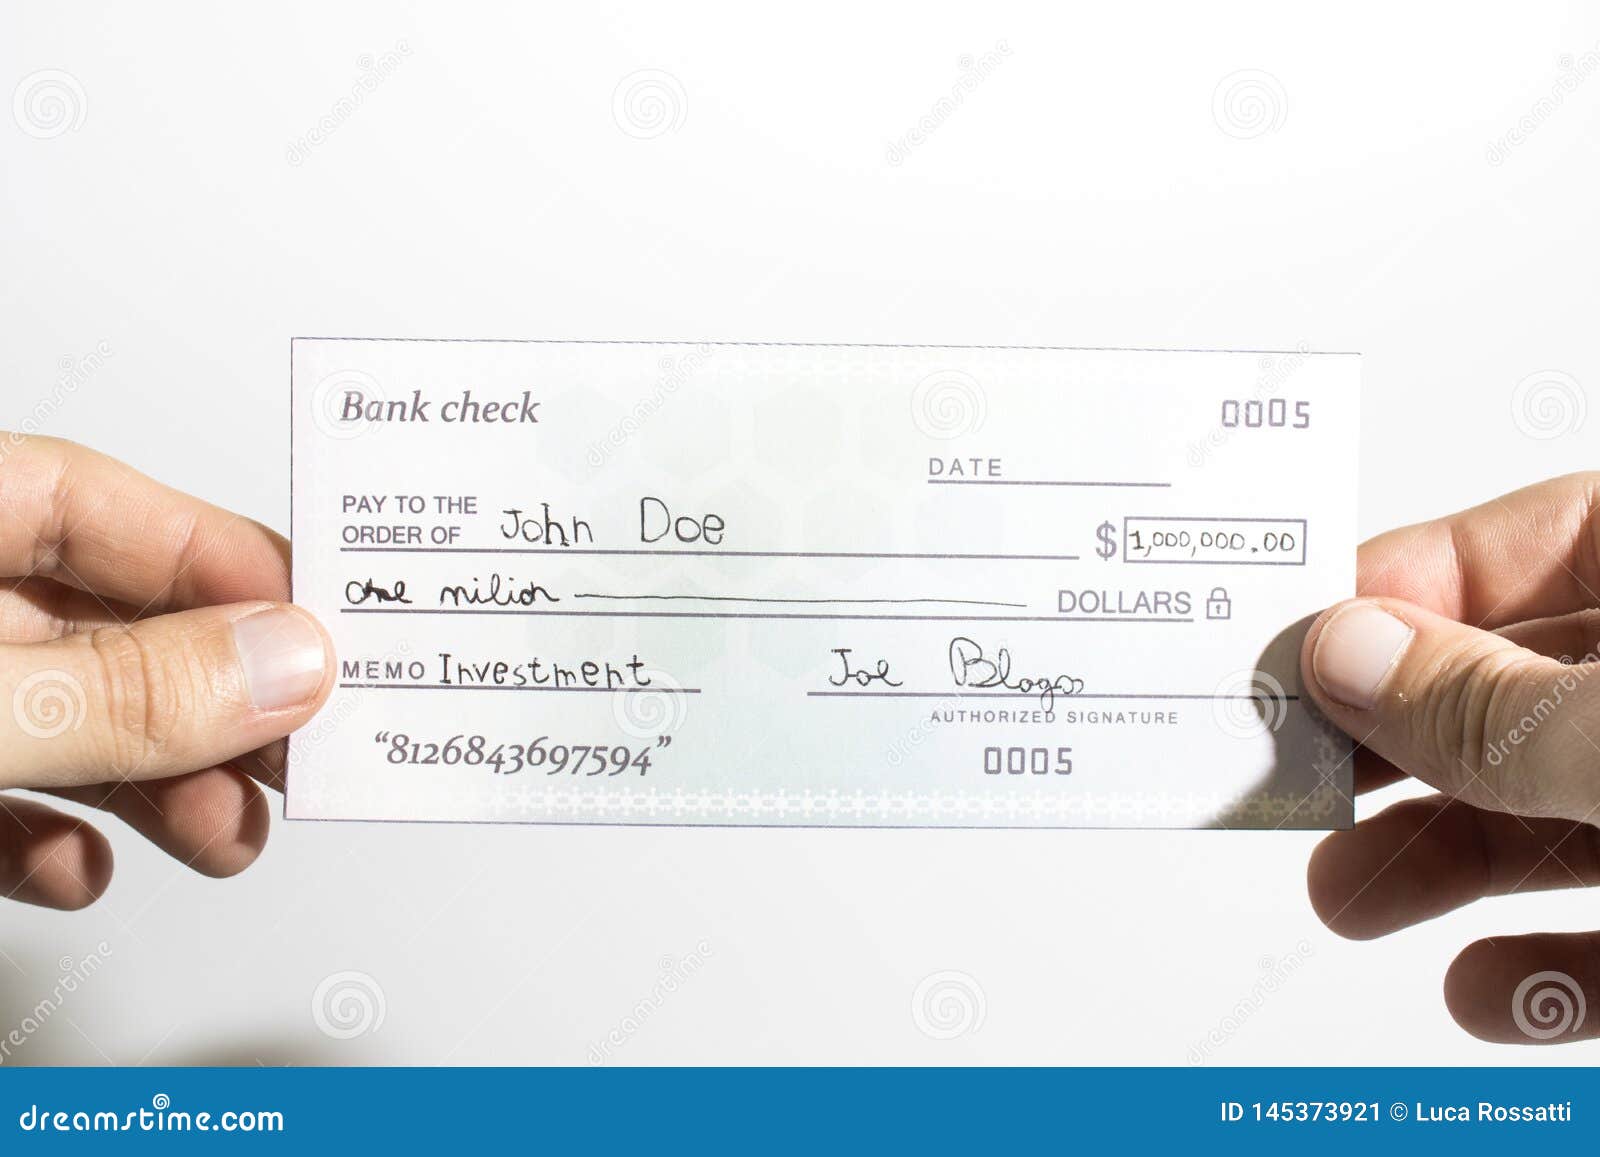 holding a million dollar bank check  in a white background